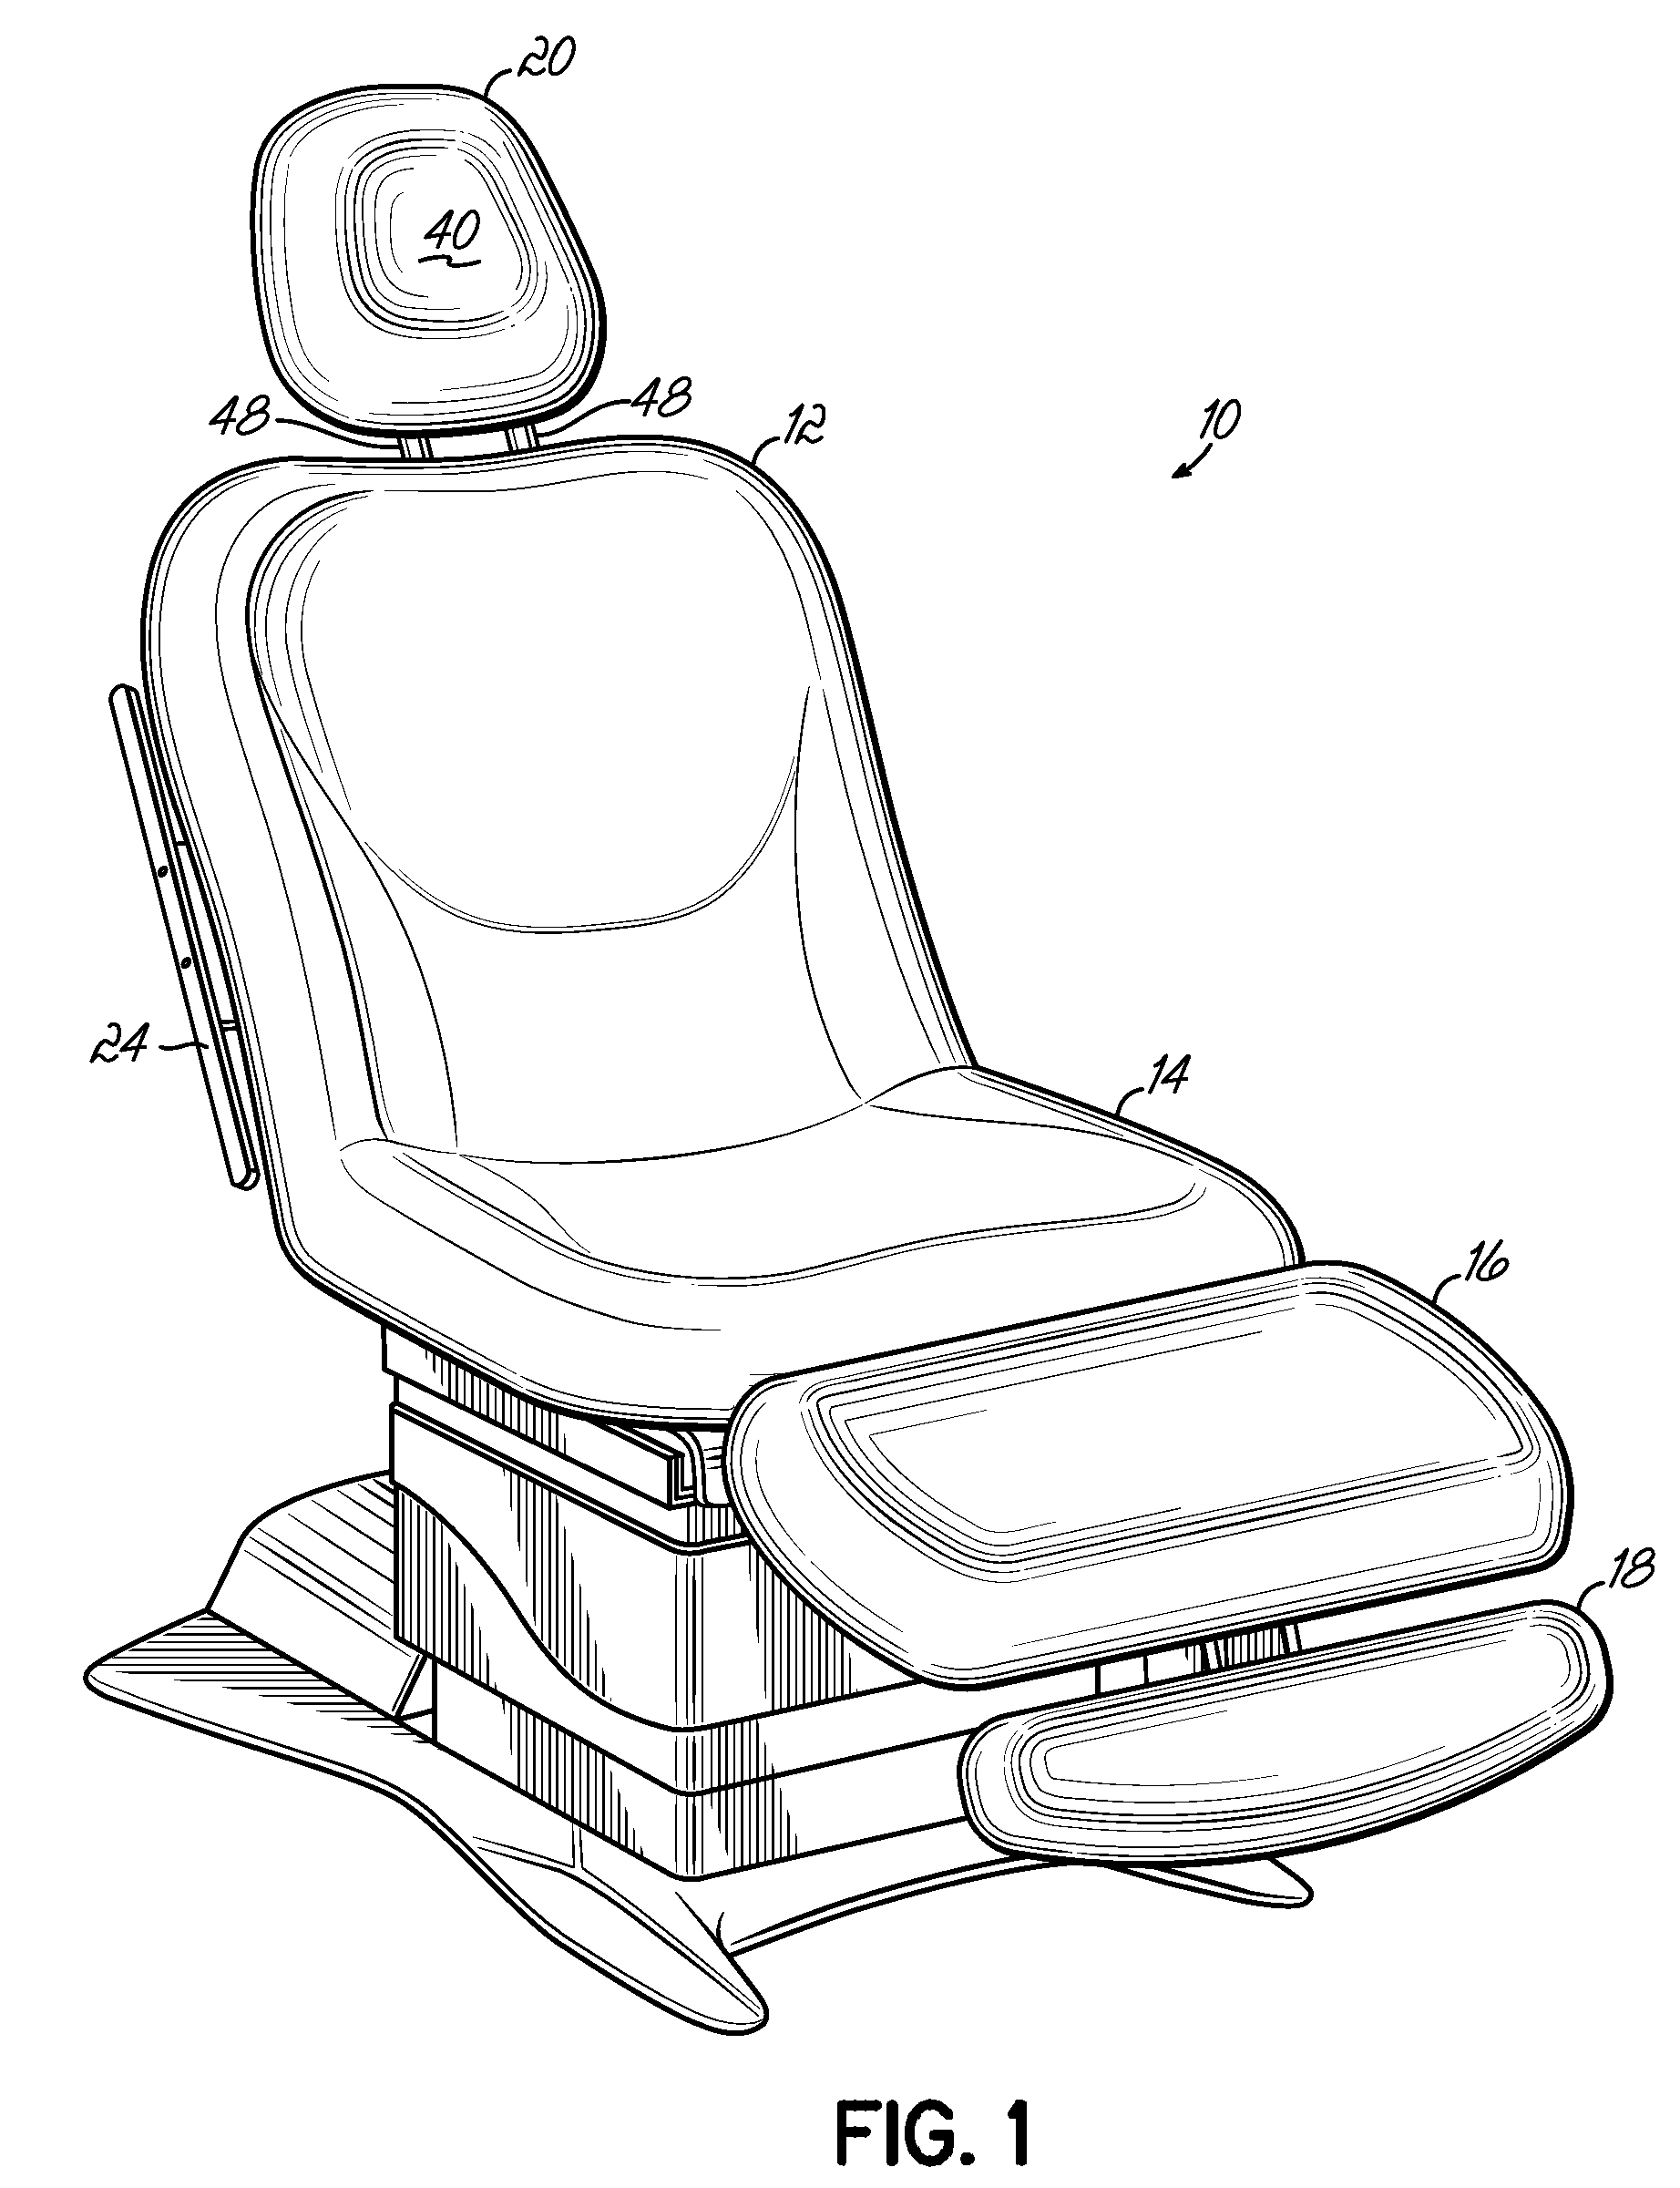 Floating bearing and clamp system for patient procedures chair mounting and positioning posts